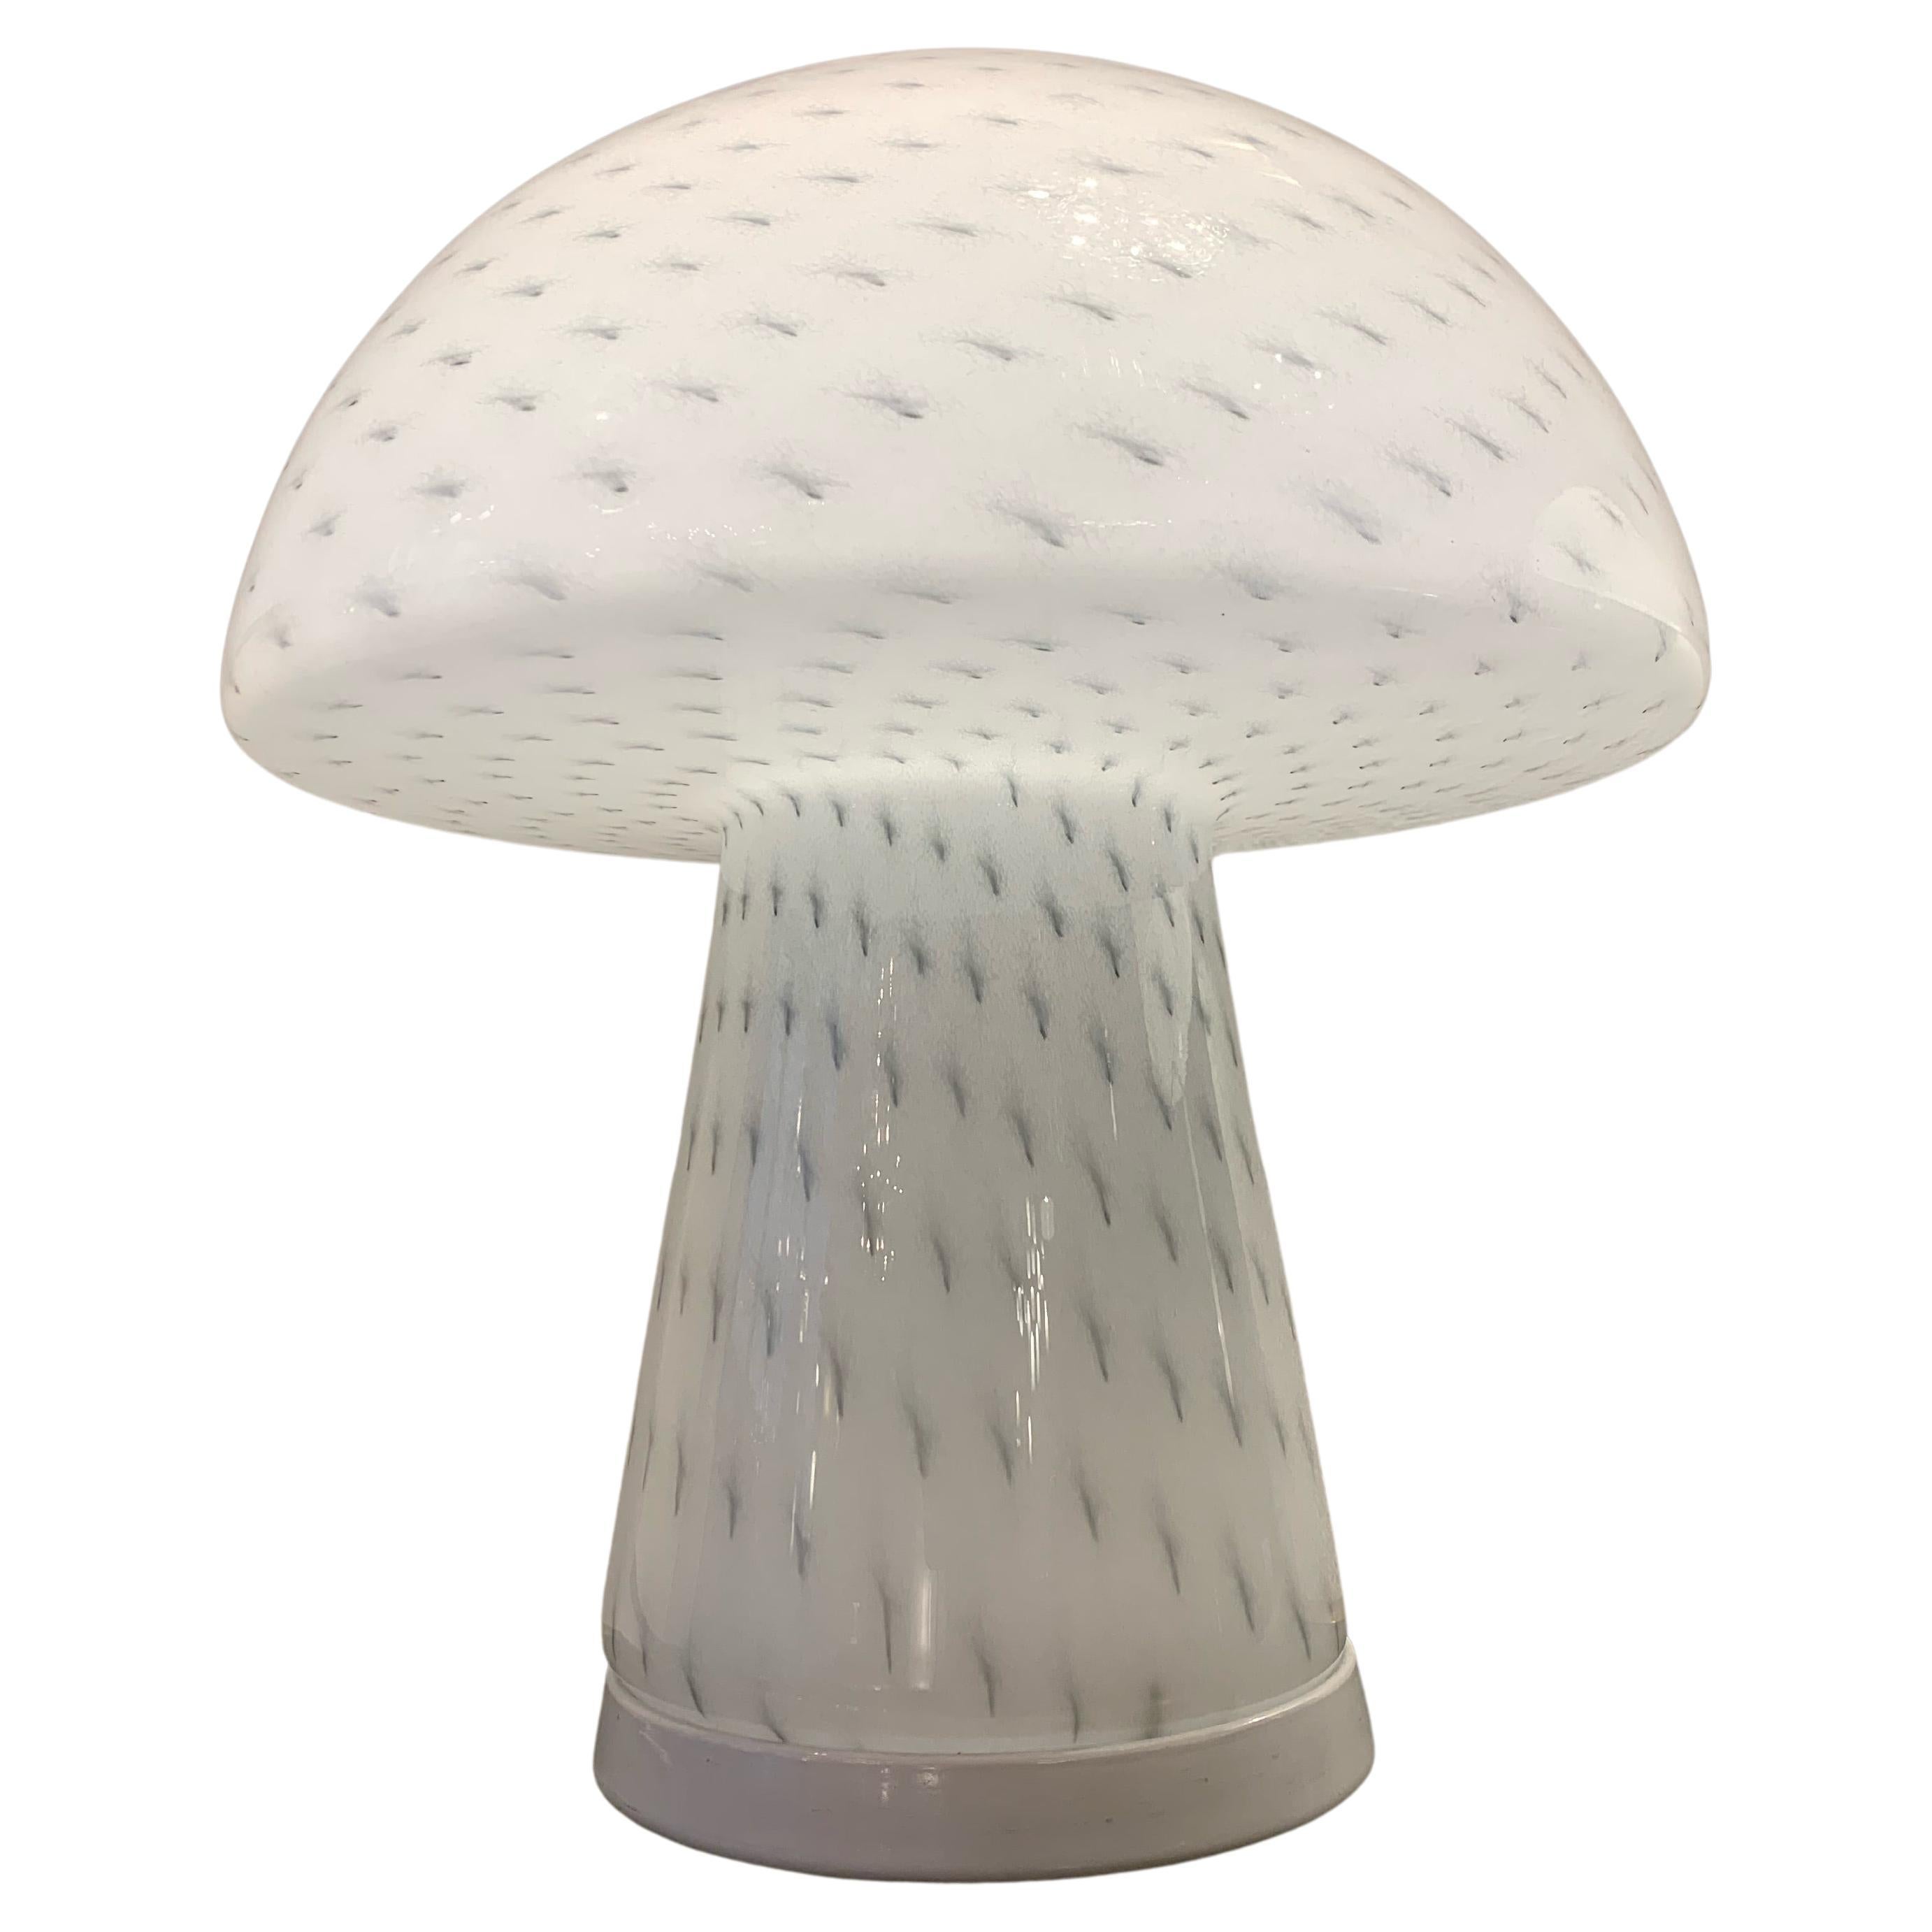 Vintage Mushroom Glass Table Lamp by Zonca, Italy, 1970s